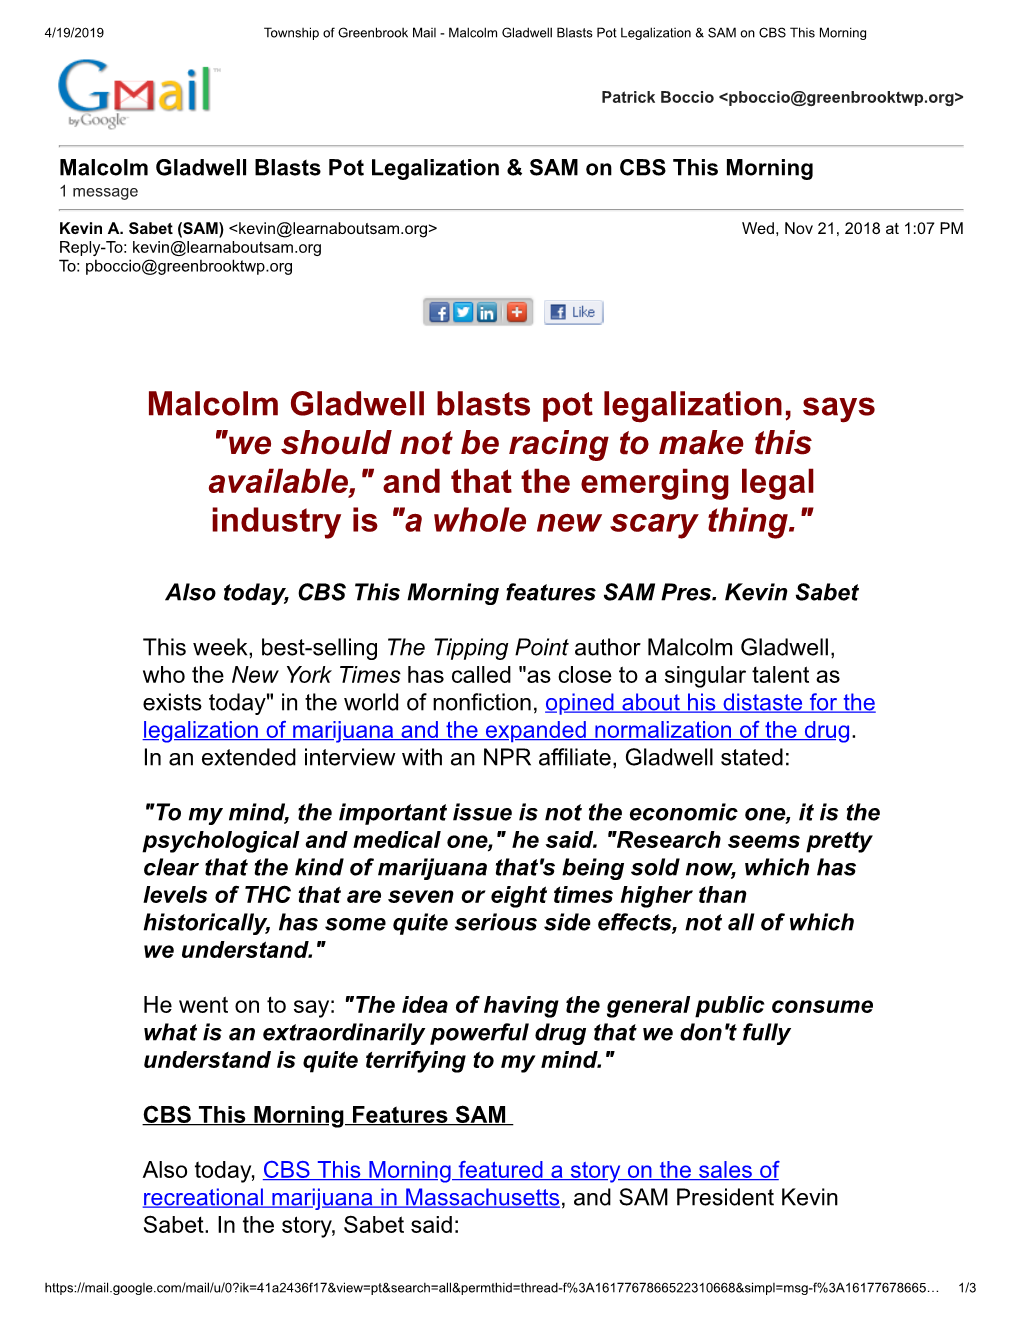 Malcolm Gladwell Blasts Pot Legalization, Says "We Should Not Be Racing to Make This Available," and That the Emerging Legal Industry Is "A Whole New Scary Thing."